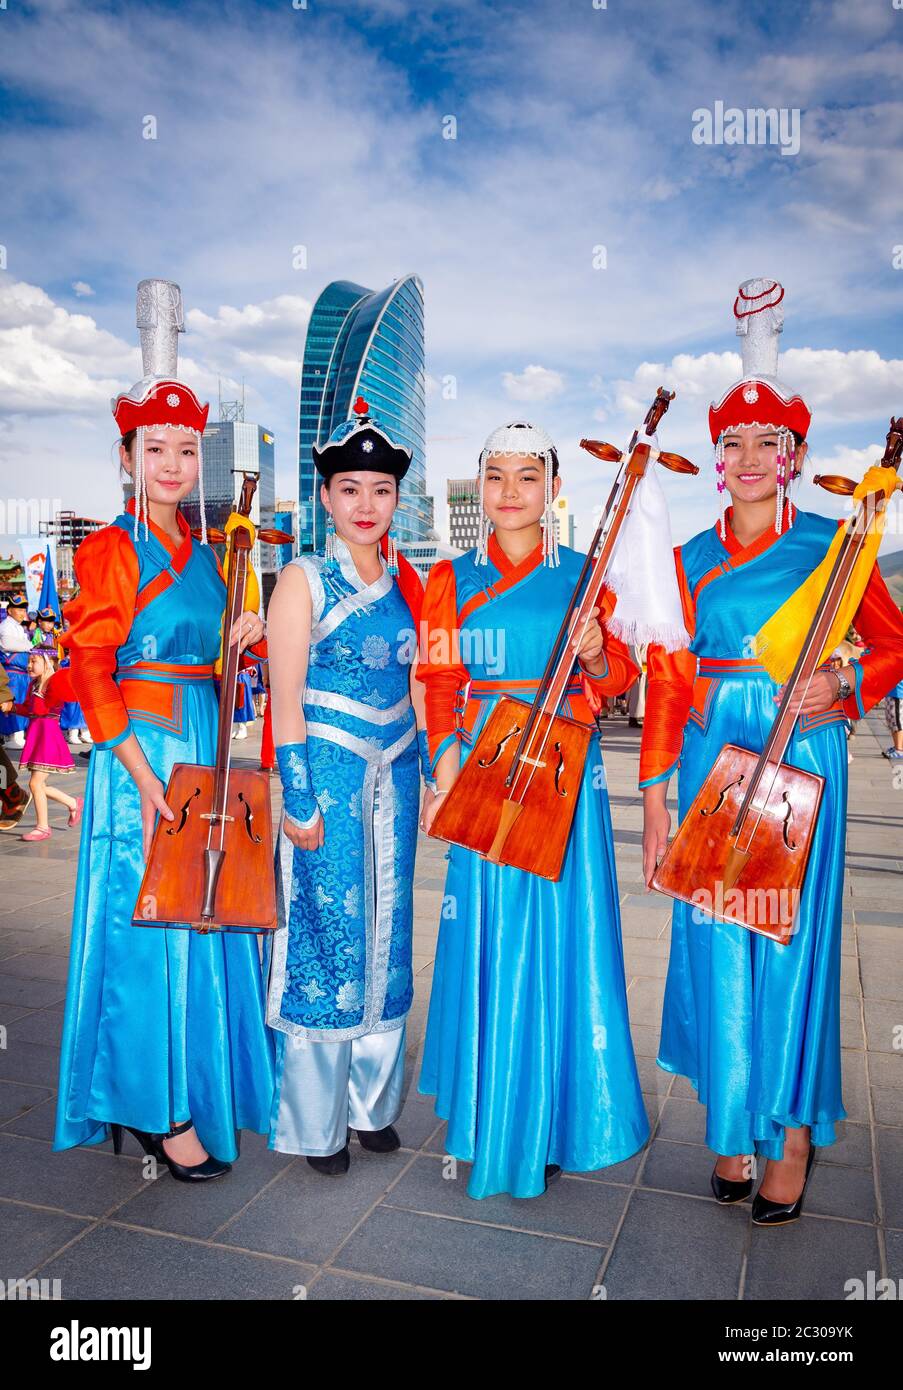 Mongolian girls wearing traditional costume and posing with national music instrument Morin huur, the Sukhbaatar square, Ulaanbaatar capital city Stock Photo